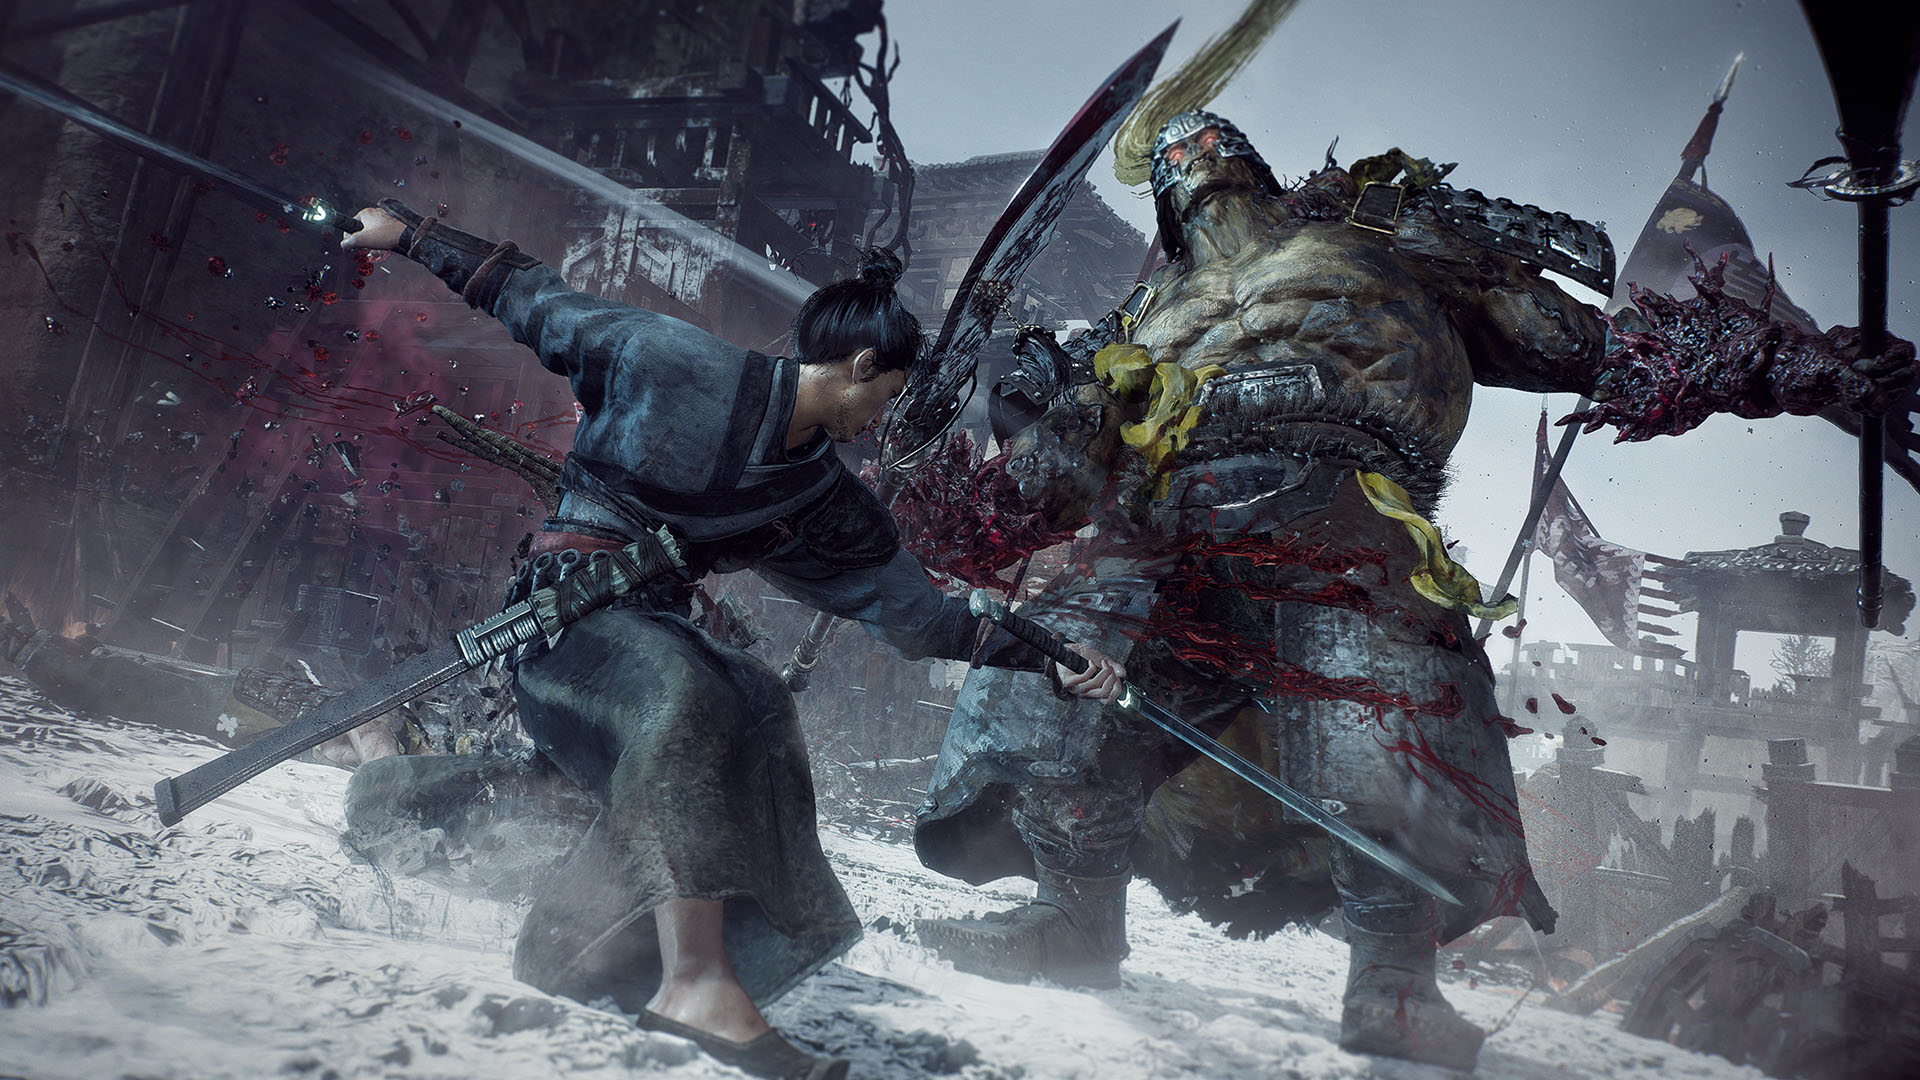 Ghost Of Tsushima PC - System Requirements & Steps To Play On Windows